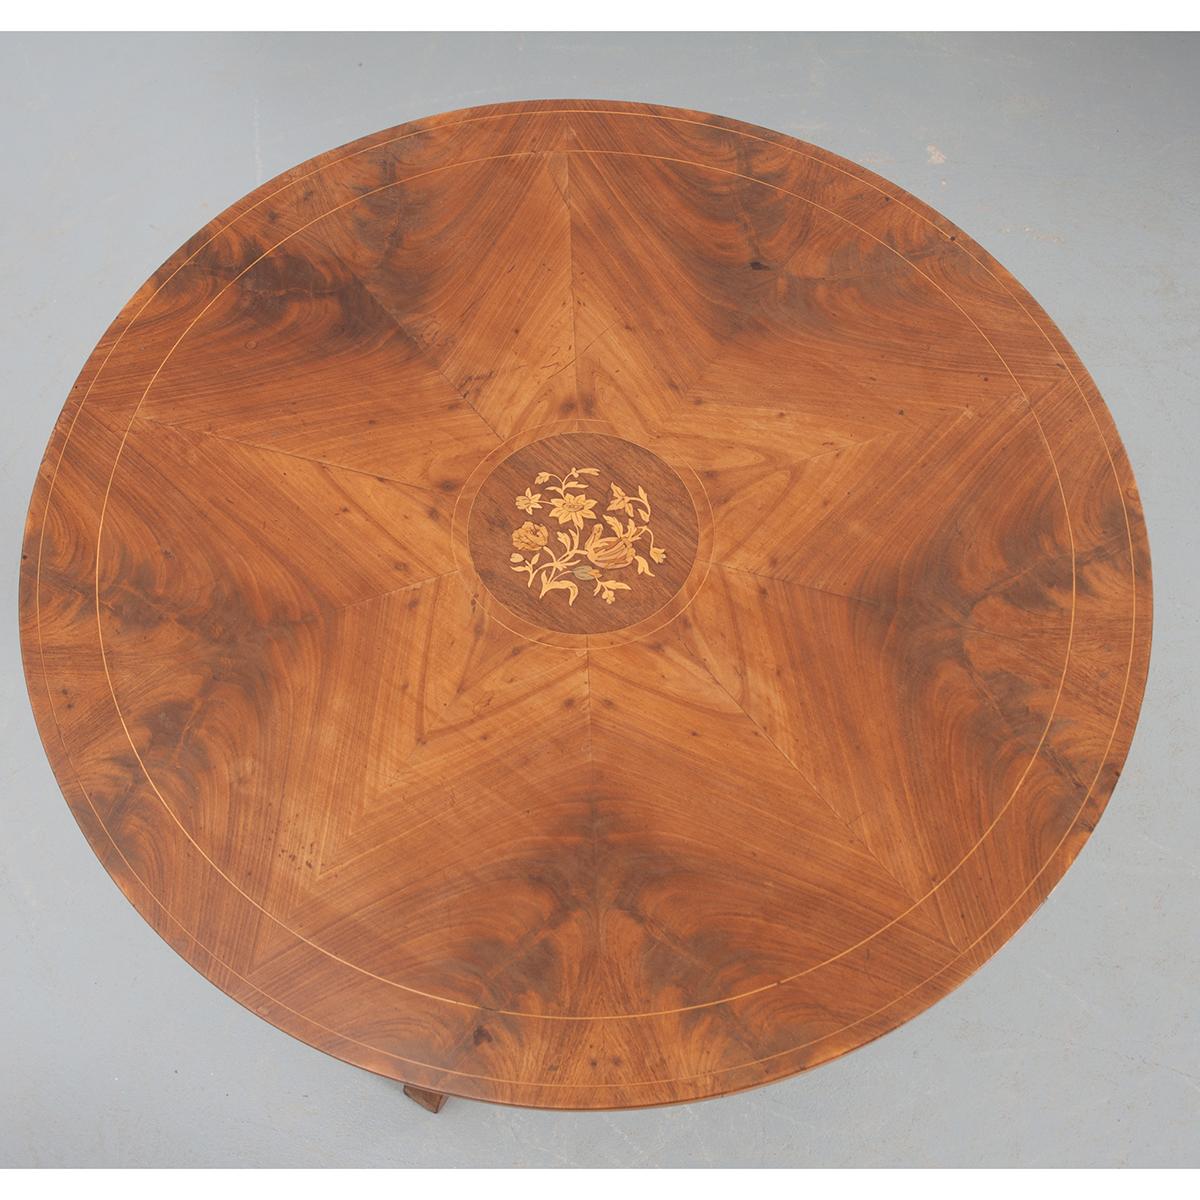 This mahogany tea table is quite nice. It has a center medallion of mixed wood inlay depicting a floral and foliate motif surrounded by two thin inlay borders. Ten book-matched and pie-shaped panels form the top around the center medallion, also